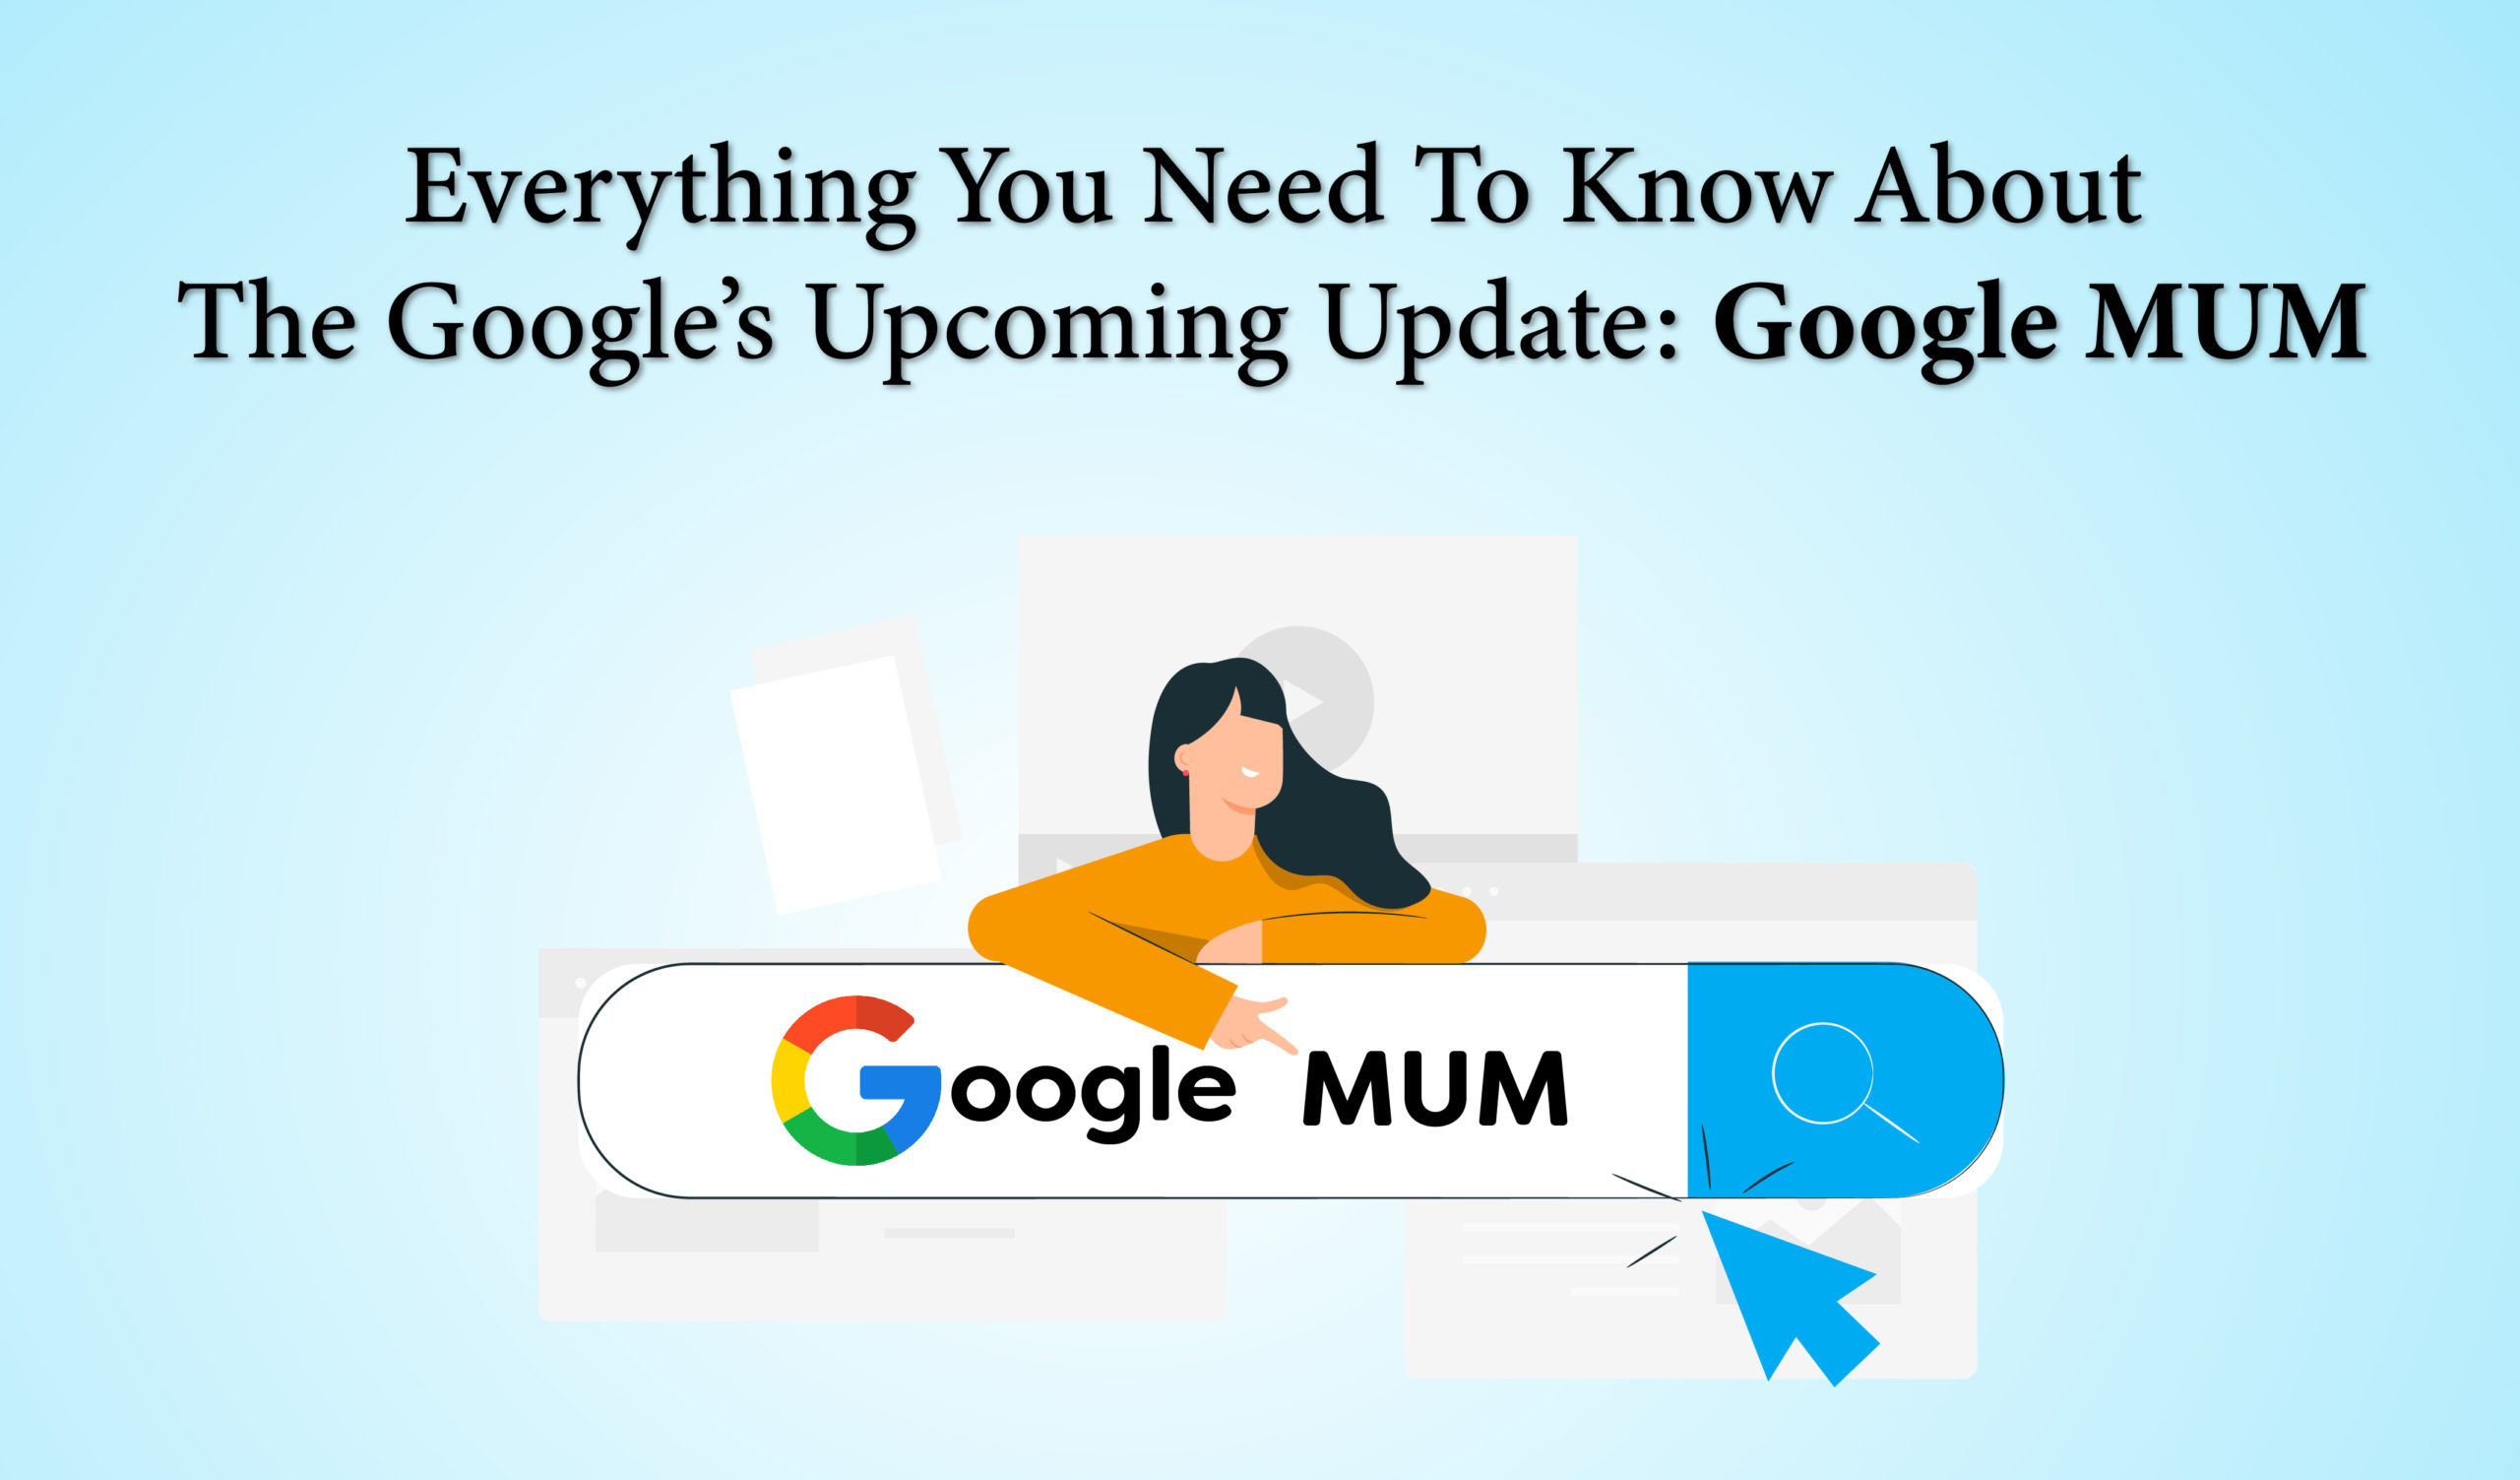 Everything you need to know about Google’s upcoming update: Google MUM